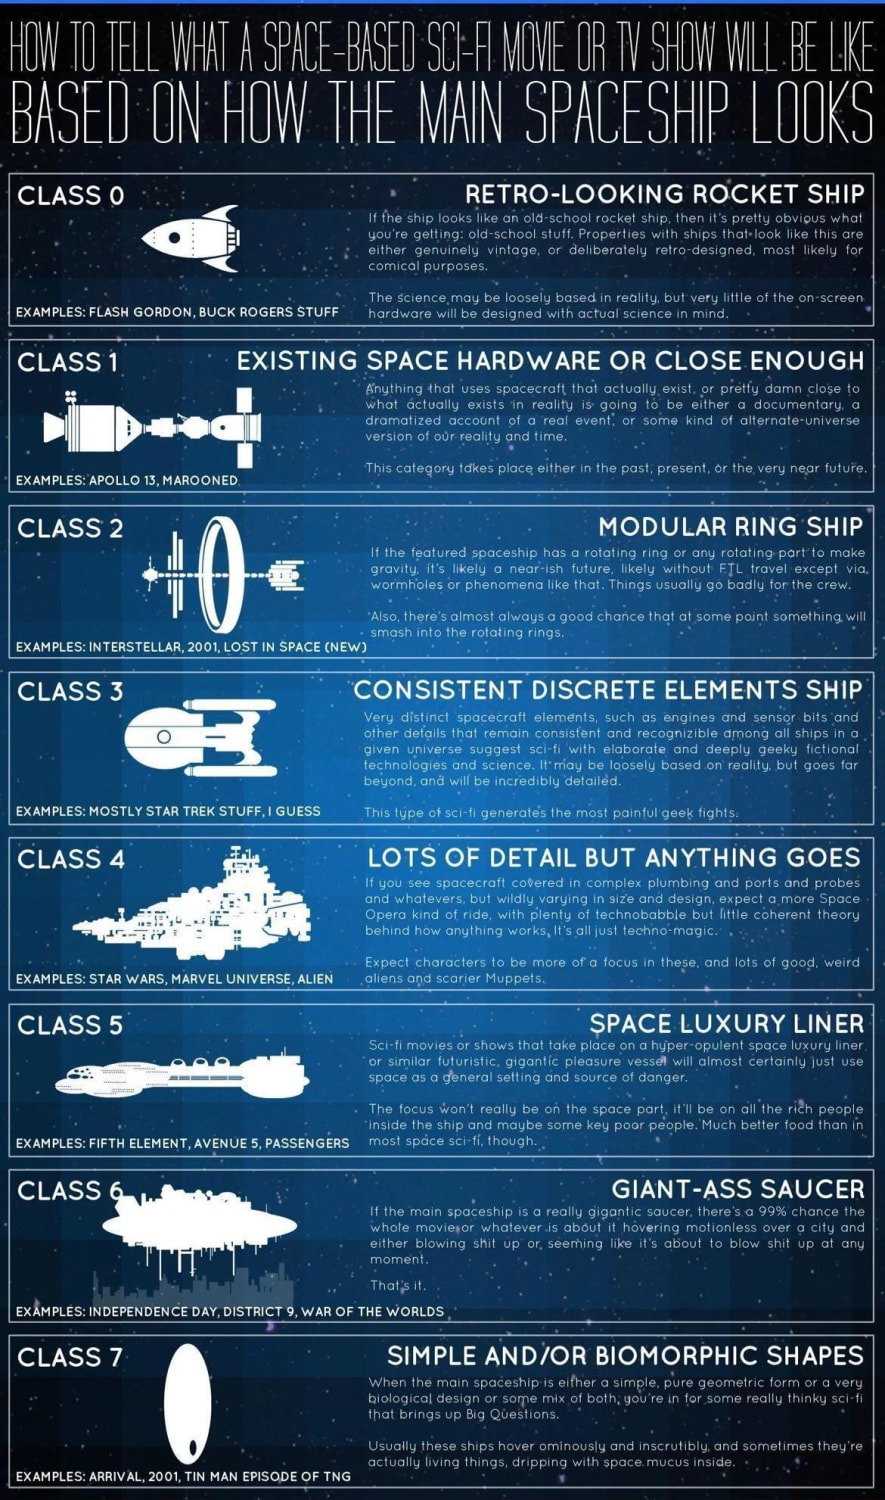 Cool guide about a spaceship's design and how it impacts sci-fi storylines